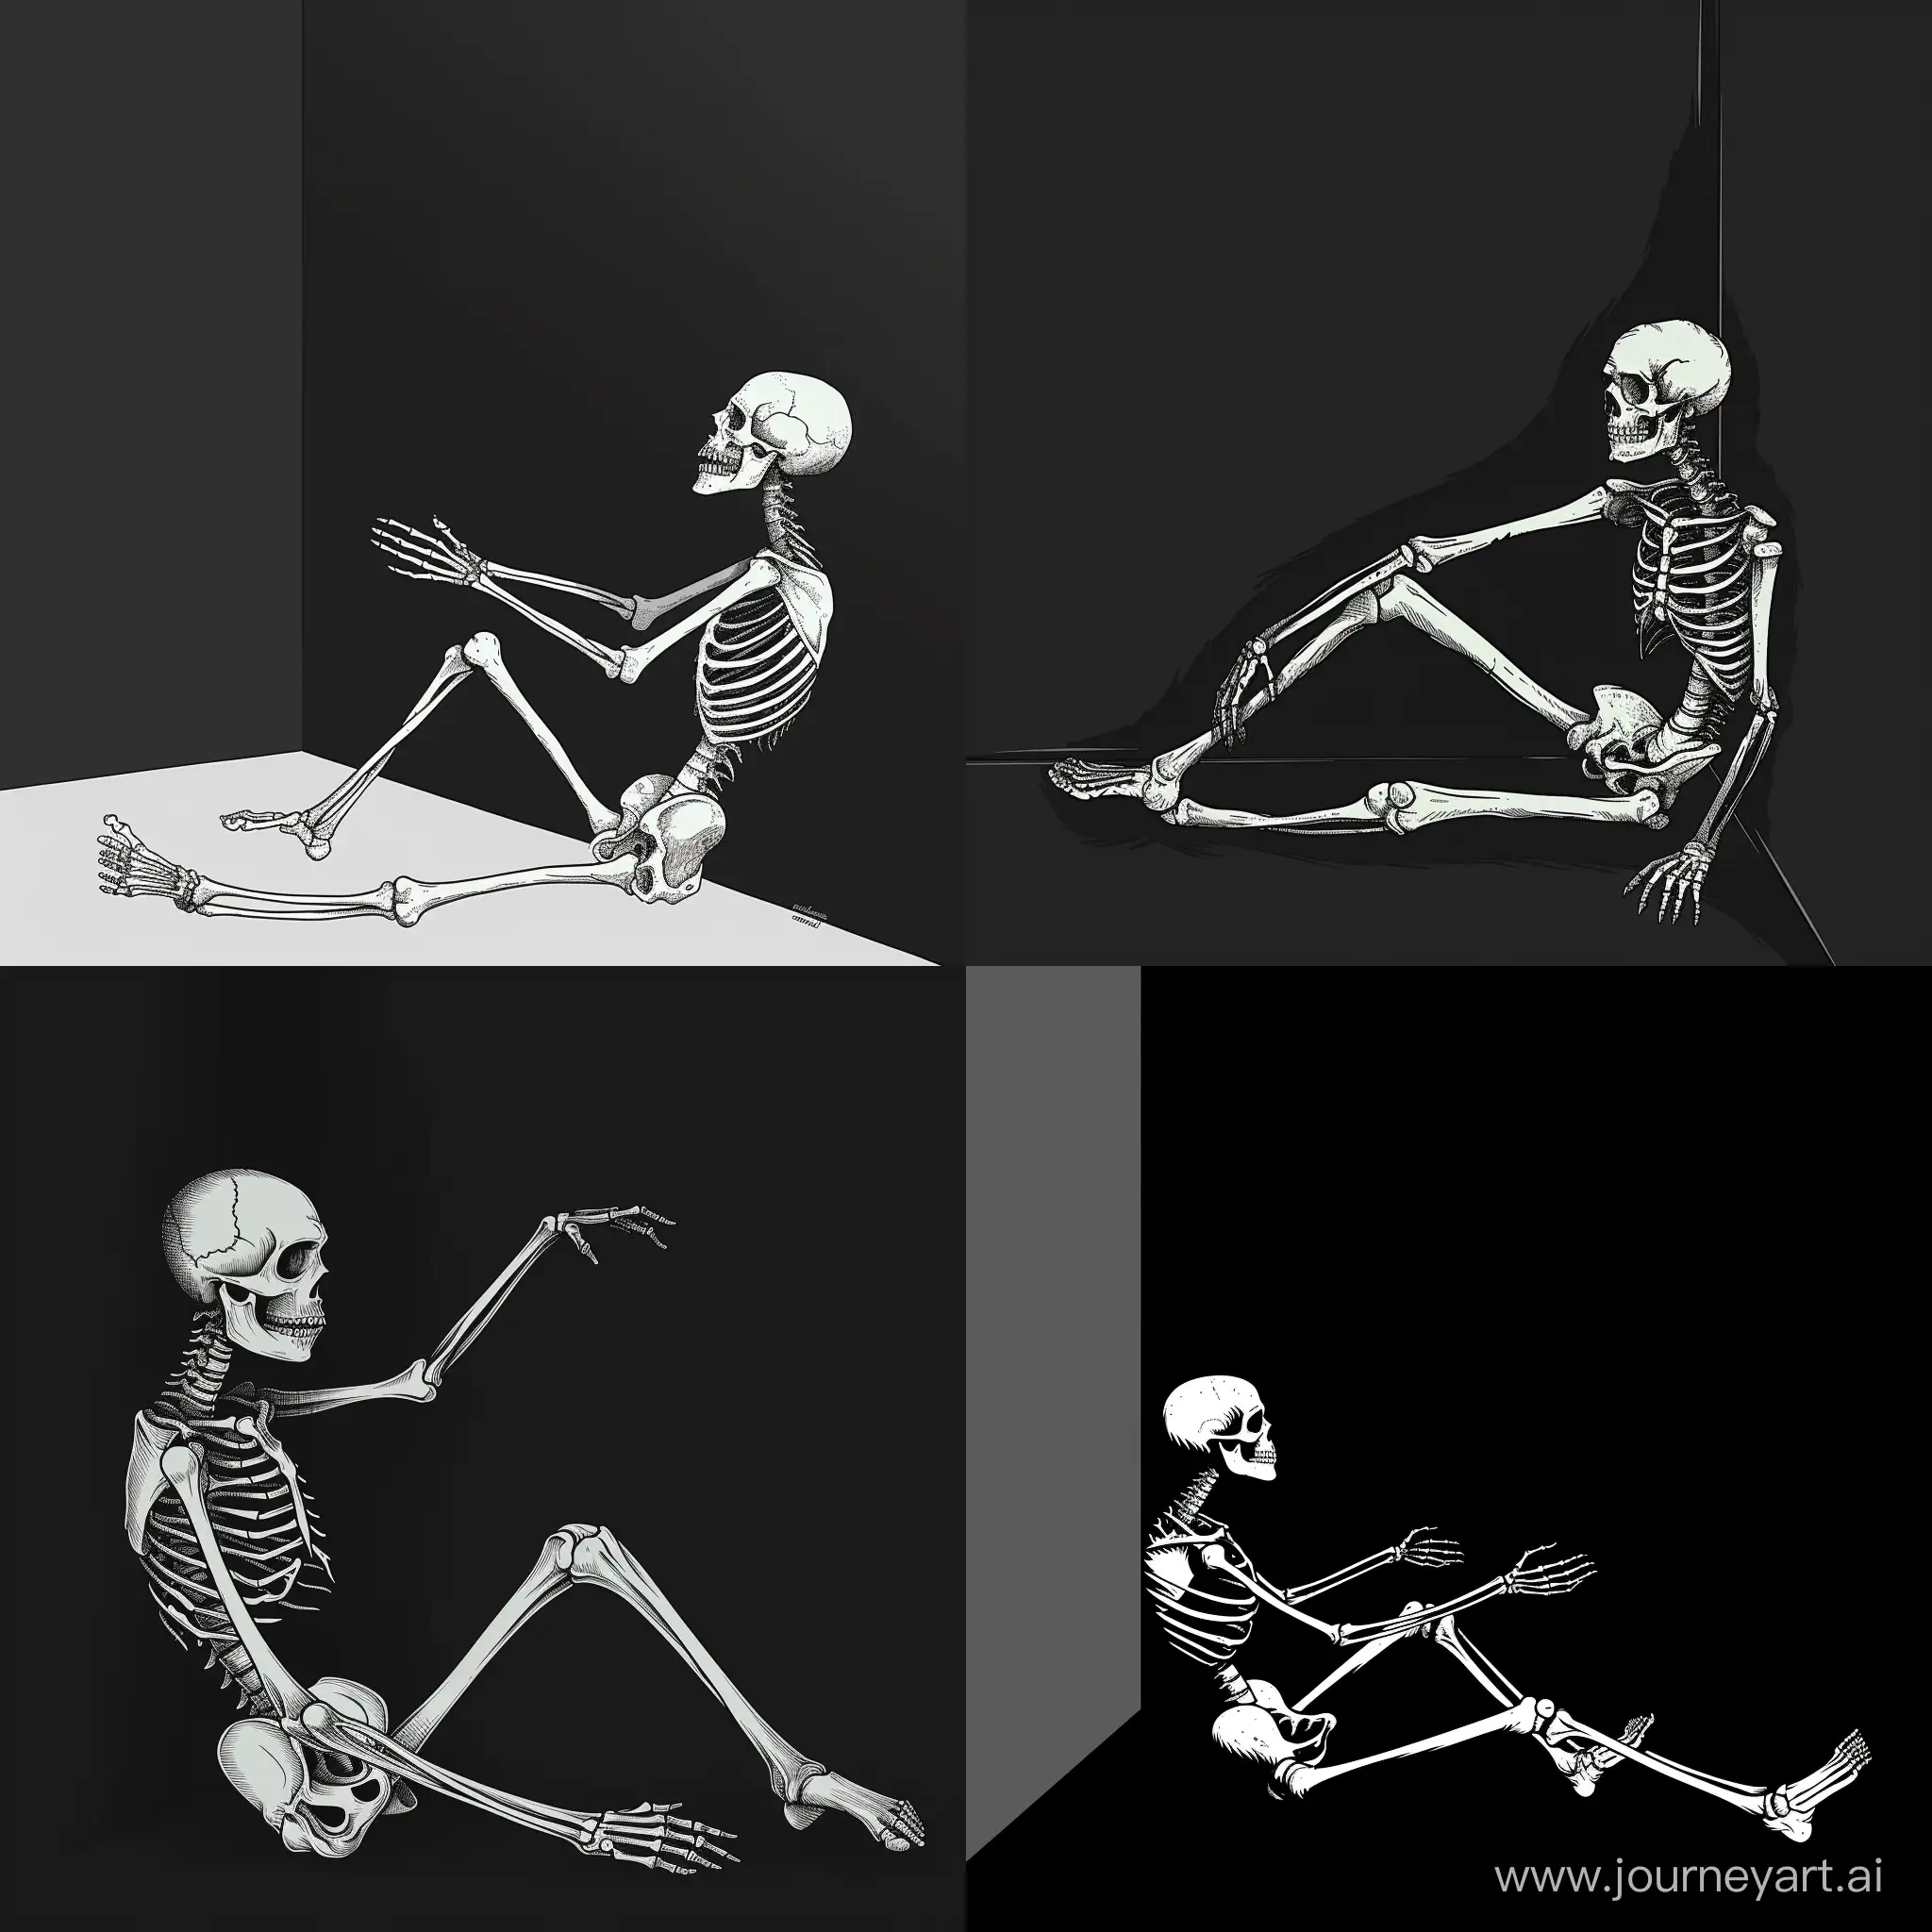 Lonely-Skeleton-Trapped-in-Despair-Minimalistic-Art-on-an-Invisible-Canvas